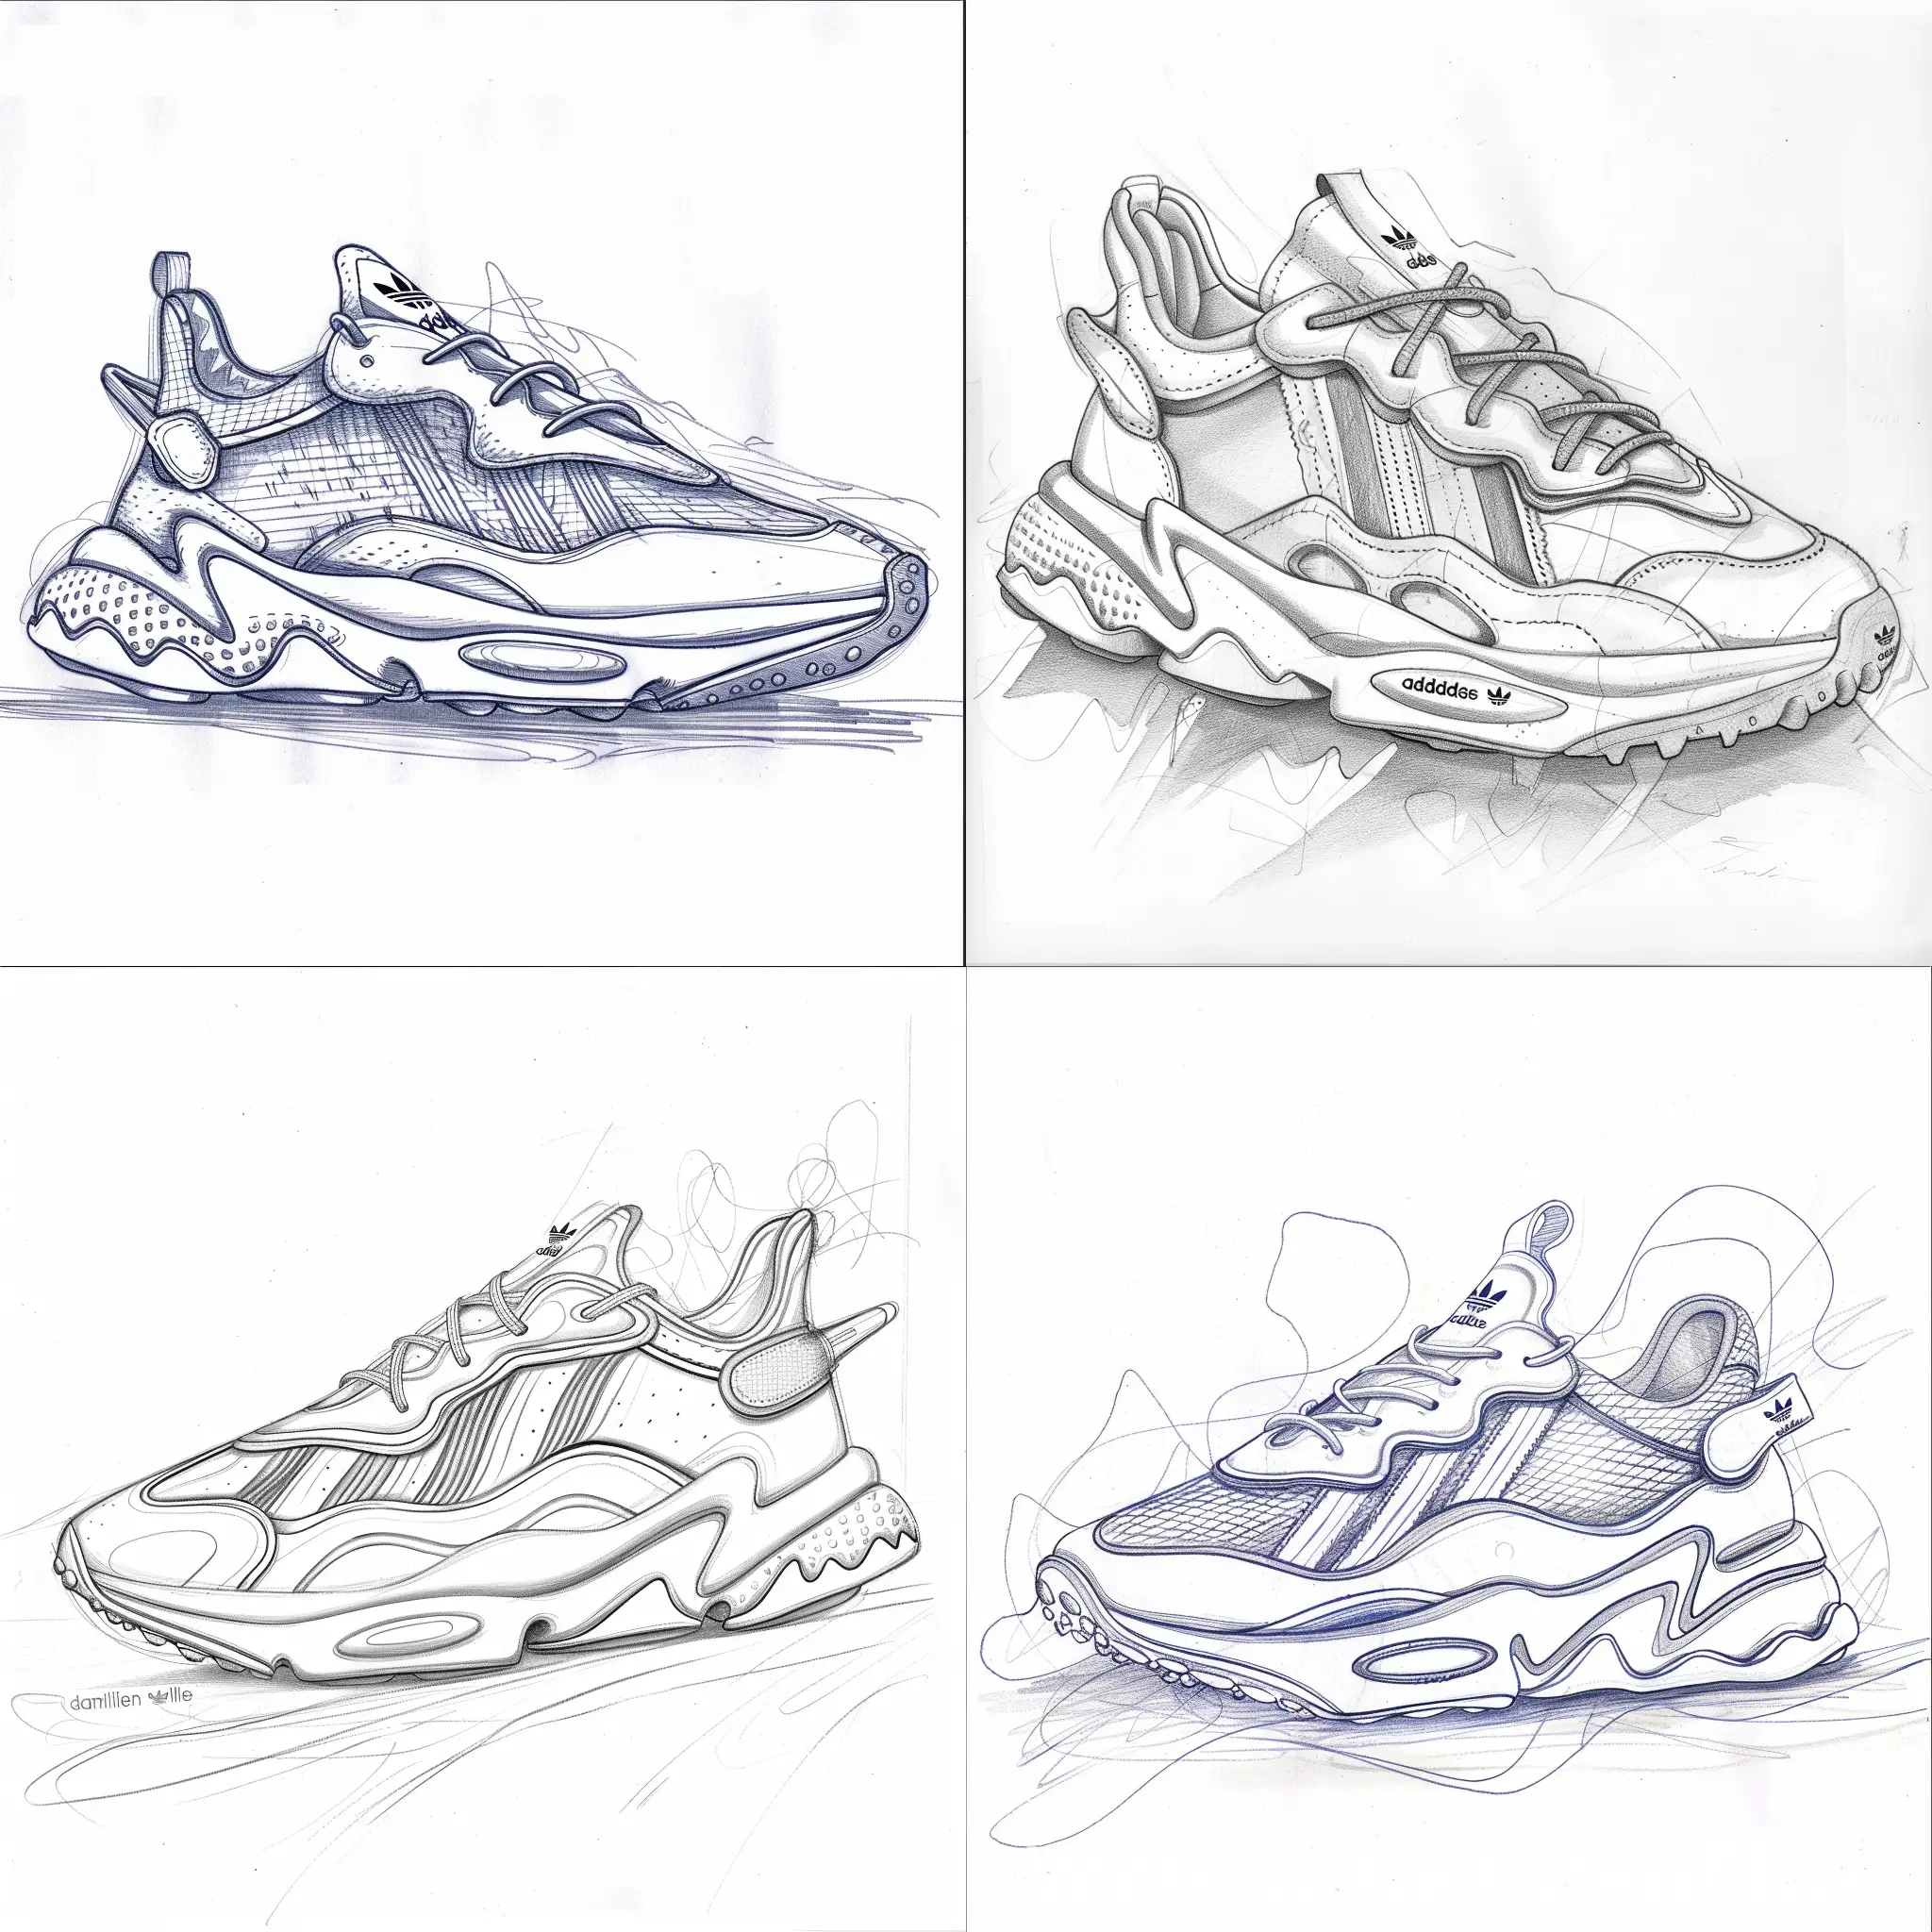 a sketch of a sneaker design like an Adidas Ozmillen model, with key features including a modern and stylish design with curves and lines, breathability with mesh panels on the sides and top, support with a chunky sole with good cushioning, and brand identity with signature Adidas three stripes and logo on the sole